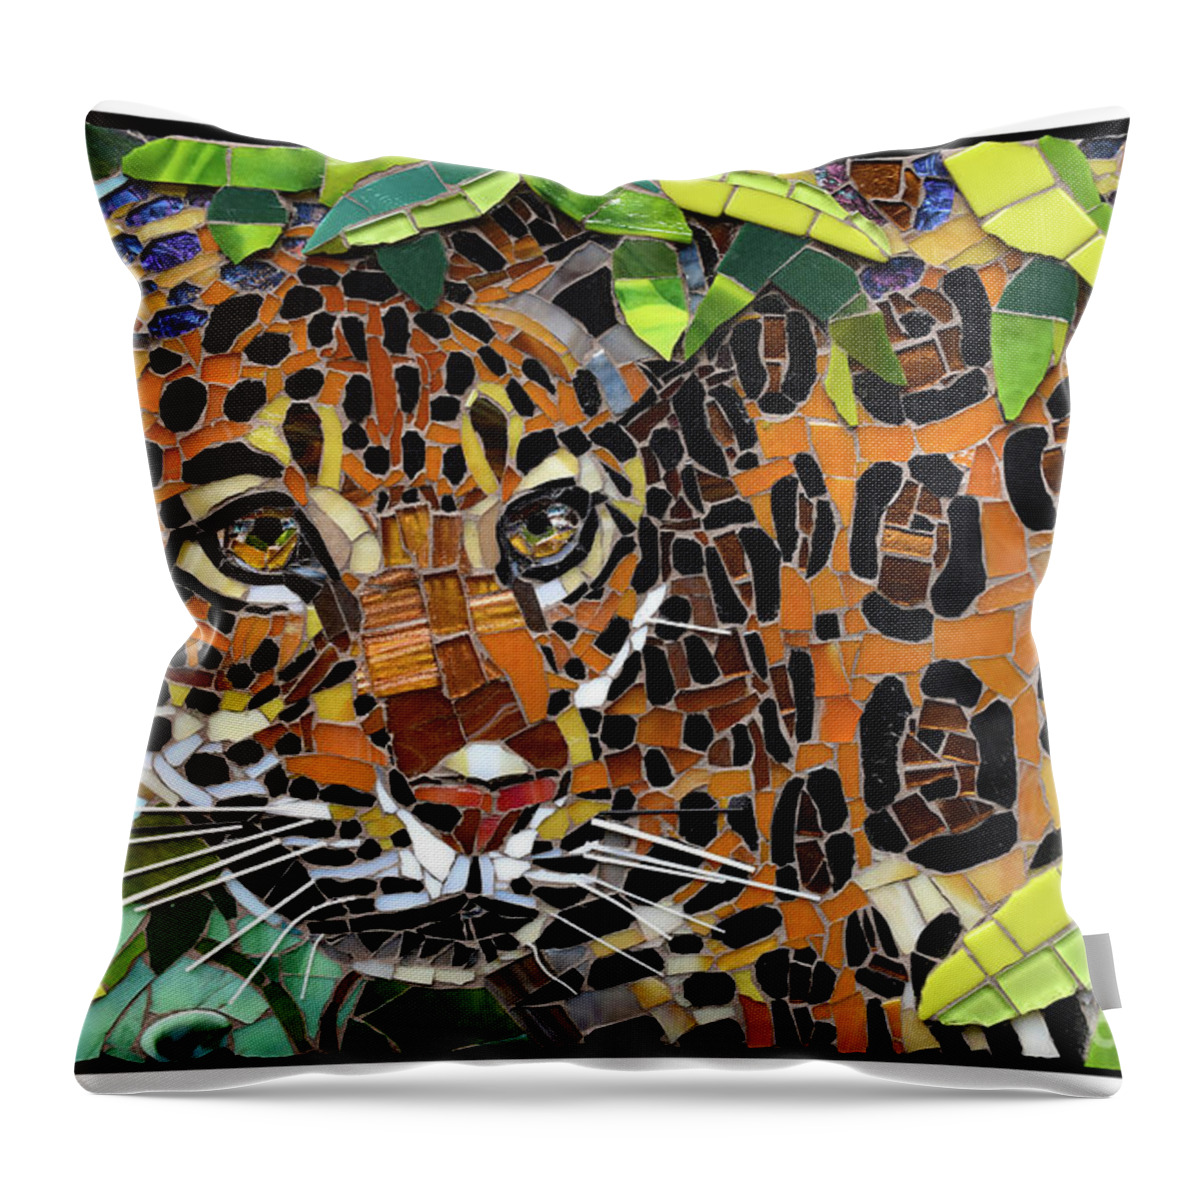 Cynthie Fisher Throw Pillow featuring the sculpture Leopard Glass Mosaic by Cynthie Fisher